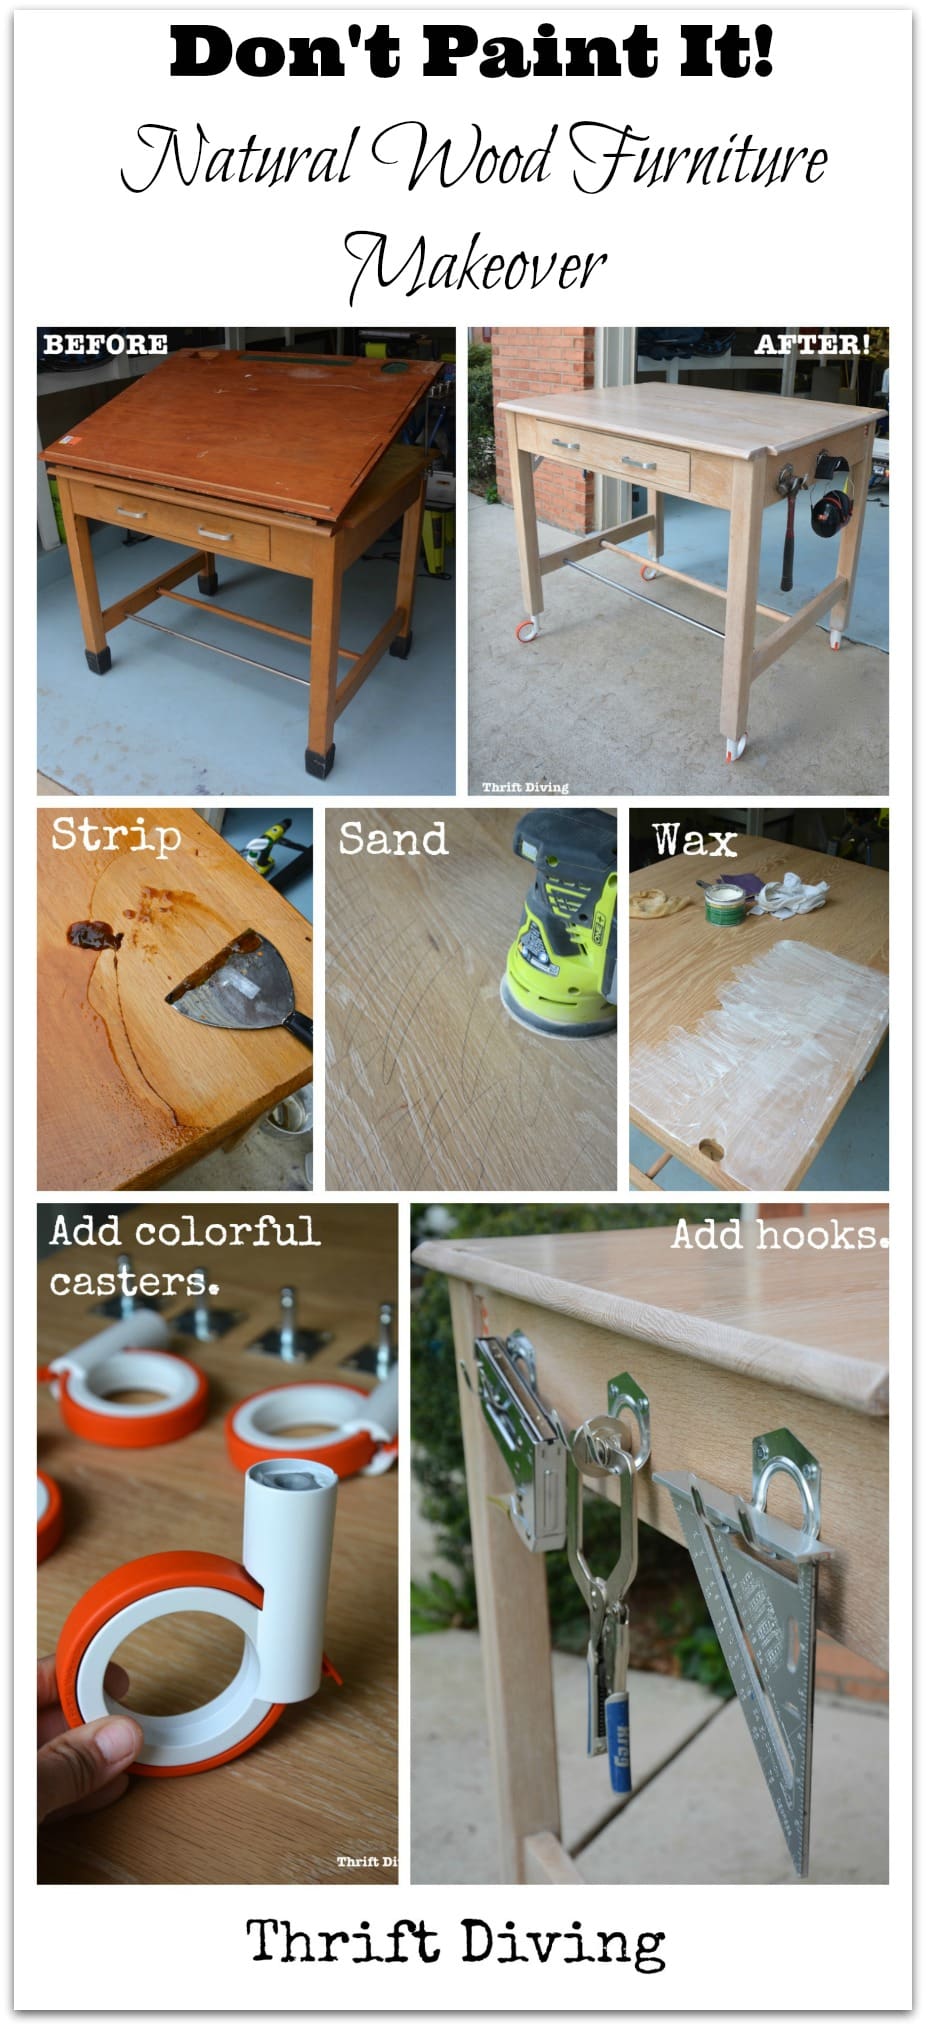 Don't paint it - Strip and wax good furniture for a natural wood finish - DIY Furniture Makeover - Thrift Diving